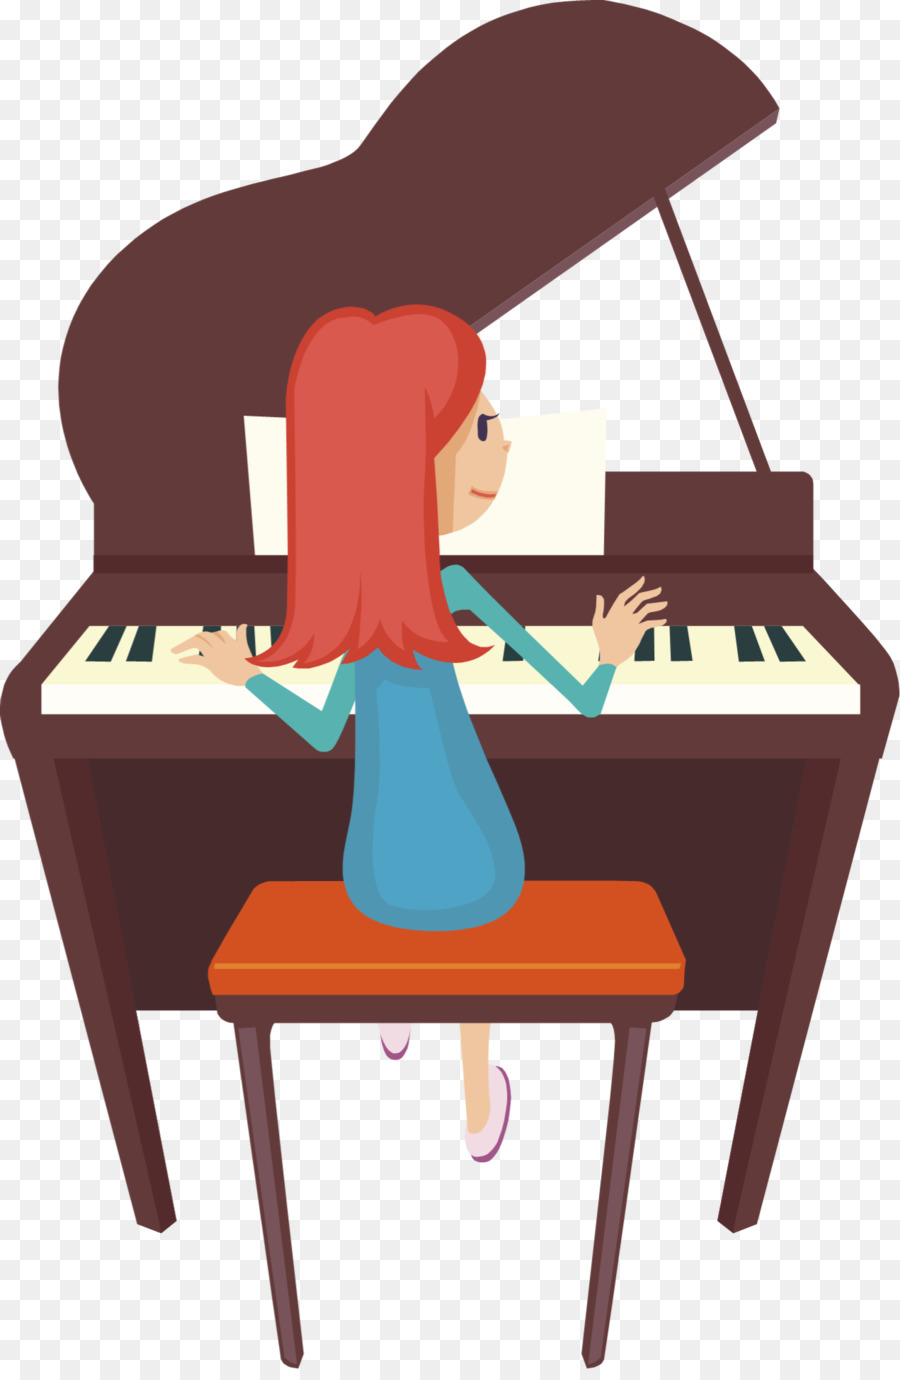 Player piano Pianist Clip art - Played Cliparts png download - 1271*1933 - Free Transparent  png Download.